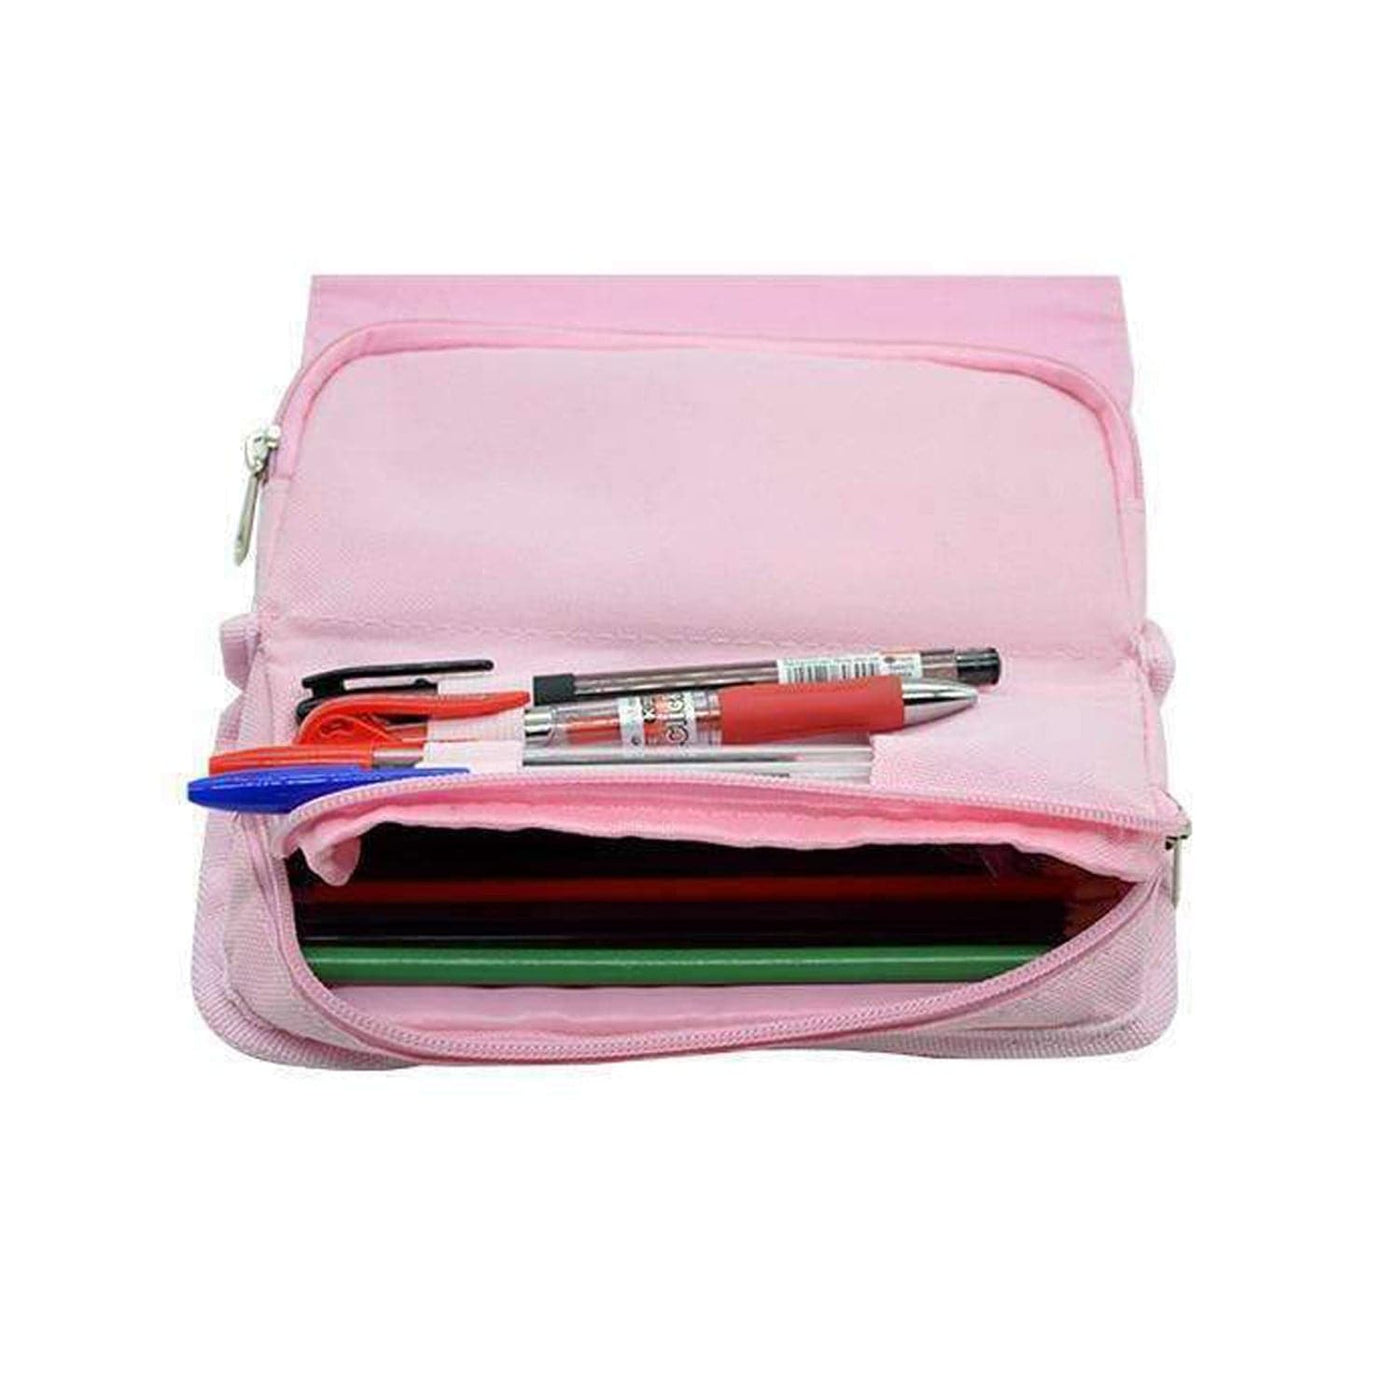 You Naughty Little Possum - Too Hot To Handle Pencil Case